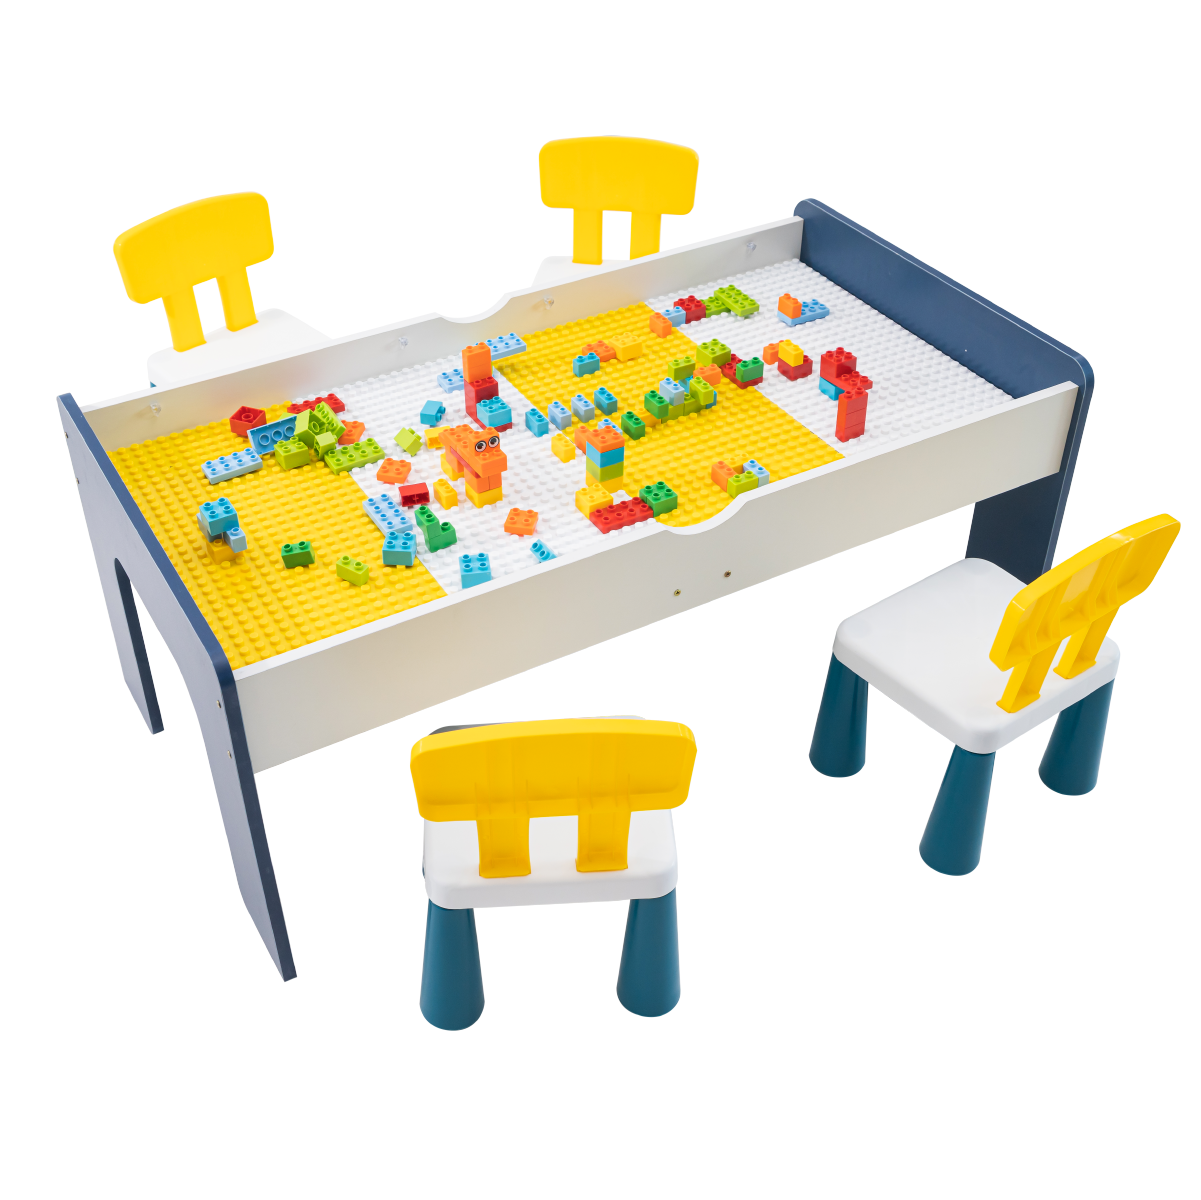 Kids Activity Table With Storage, Building Bricks Table, Playroom, Kids  Table, Train Table, Kids Desk 